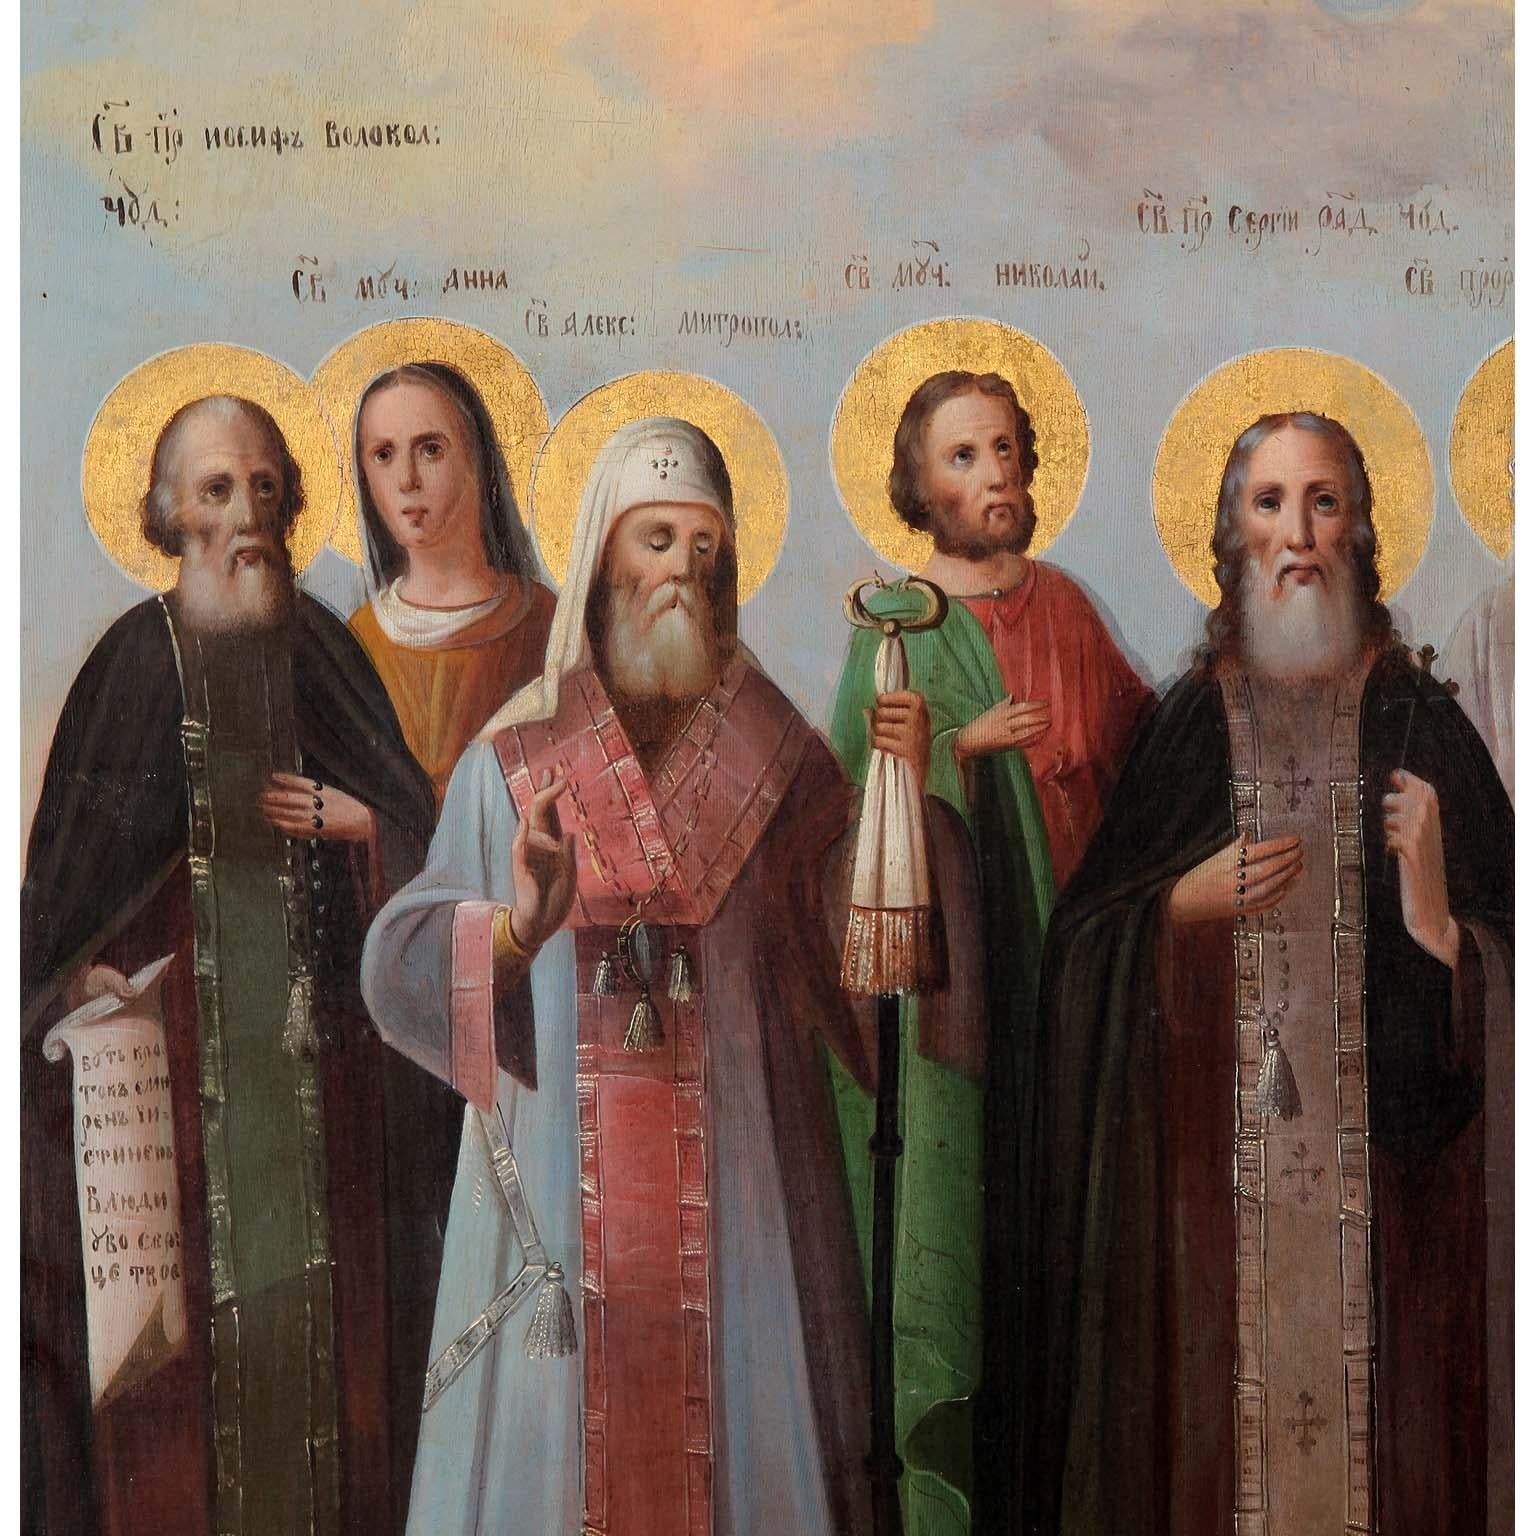 A very fine and Rare Russian mid-19th century Baroque style polychromed and gilded Religious Orthodox Christian Icon on a wooden panel with figures of standing Saint's under a watchful and protective depiction of Jesus Christ. Circa: Saint